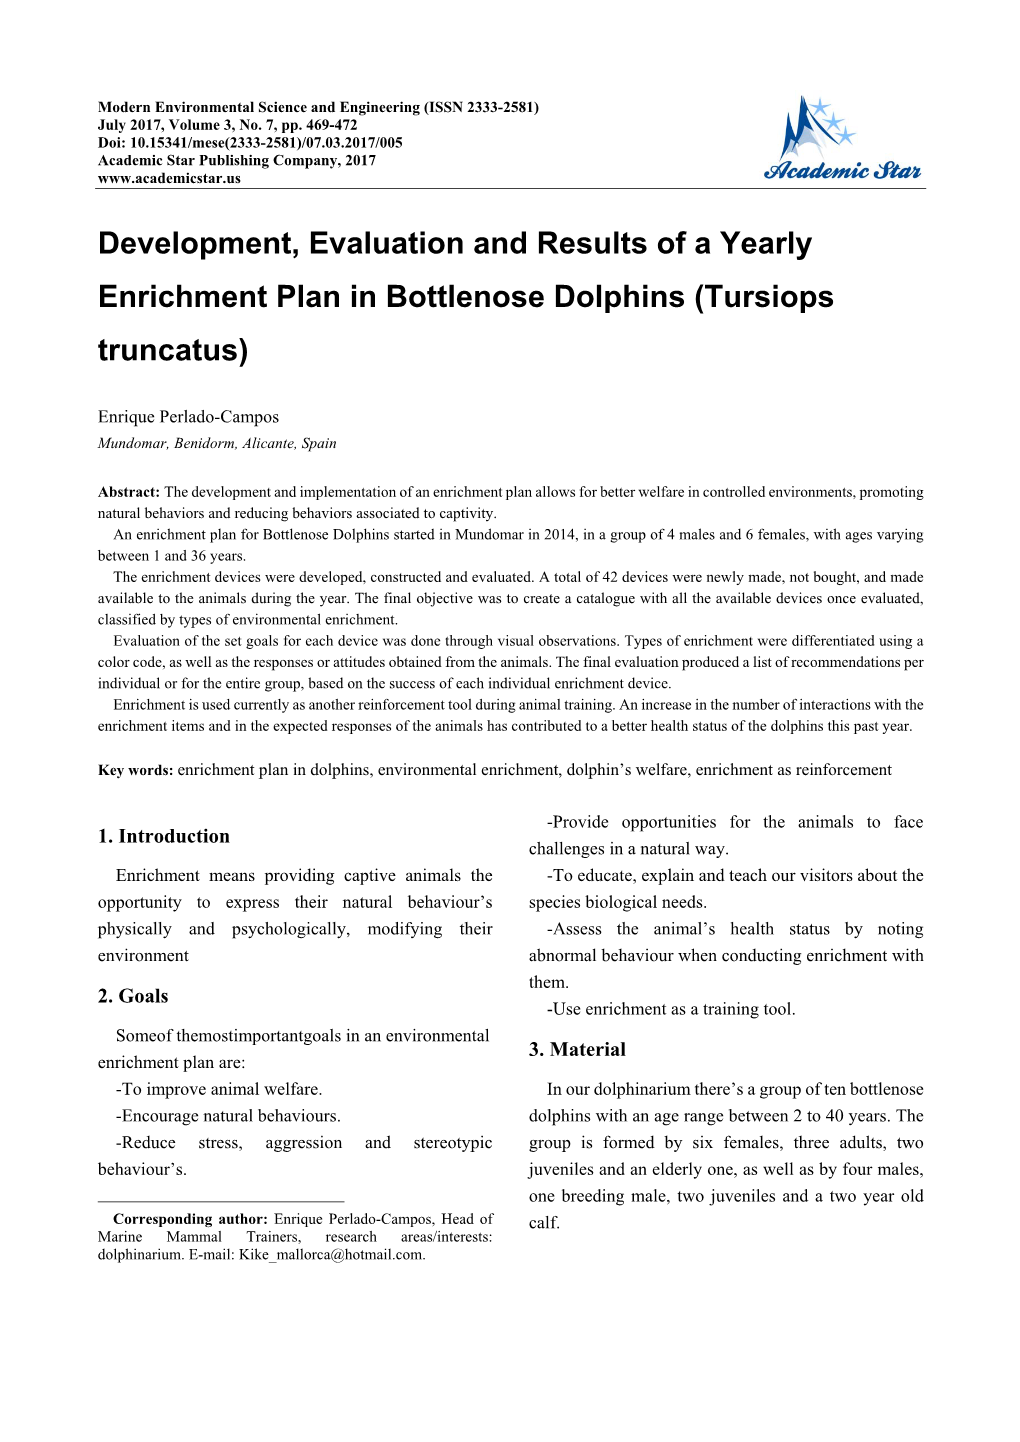 Development, Evaluation and Results of a Yearly Enrichment Plan in Bottlenose Dolphins (Tursiops Truncatus)